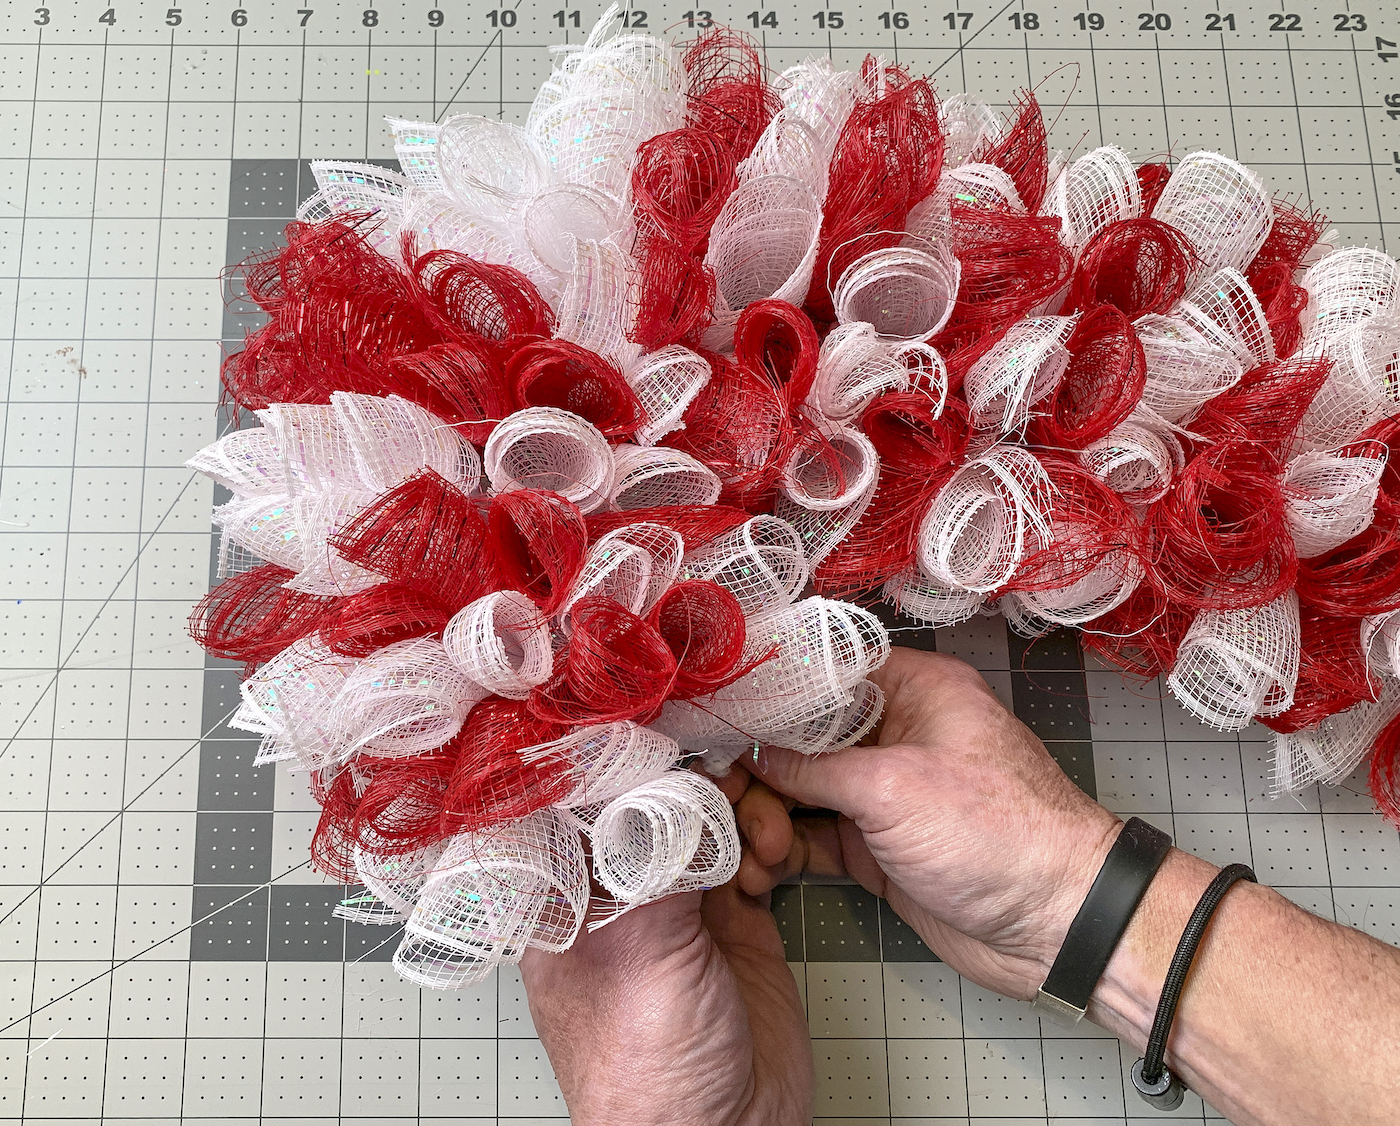 Adding the last piece of deco mesh to the candy cane wreath